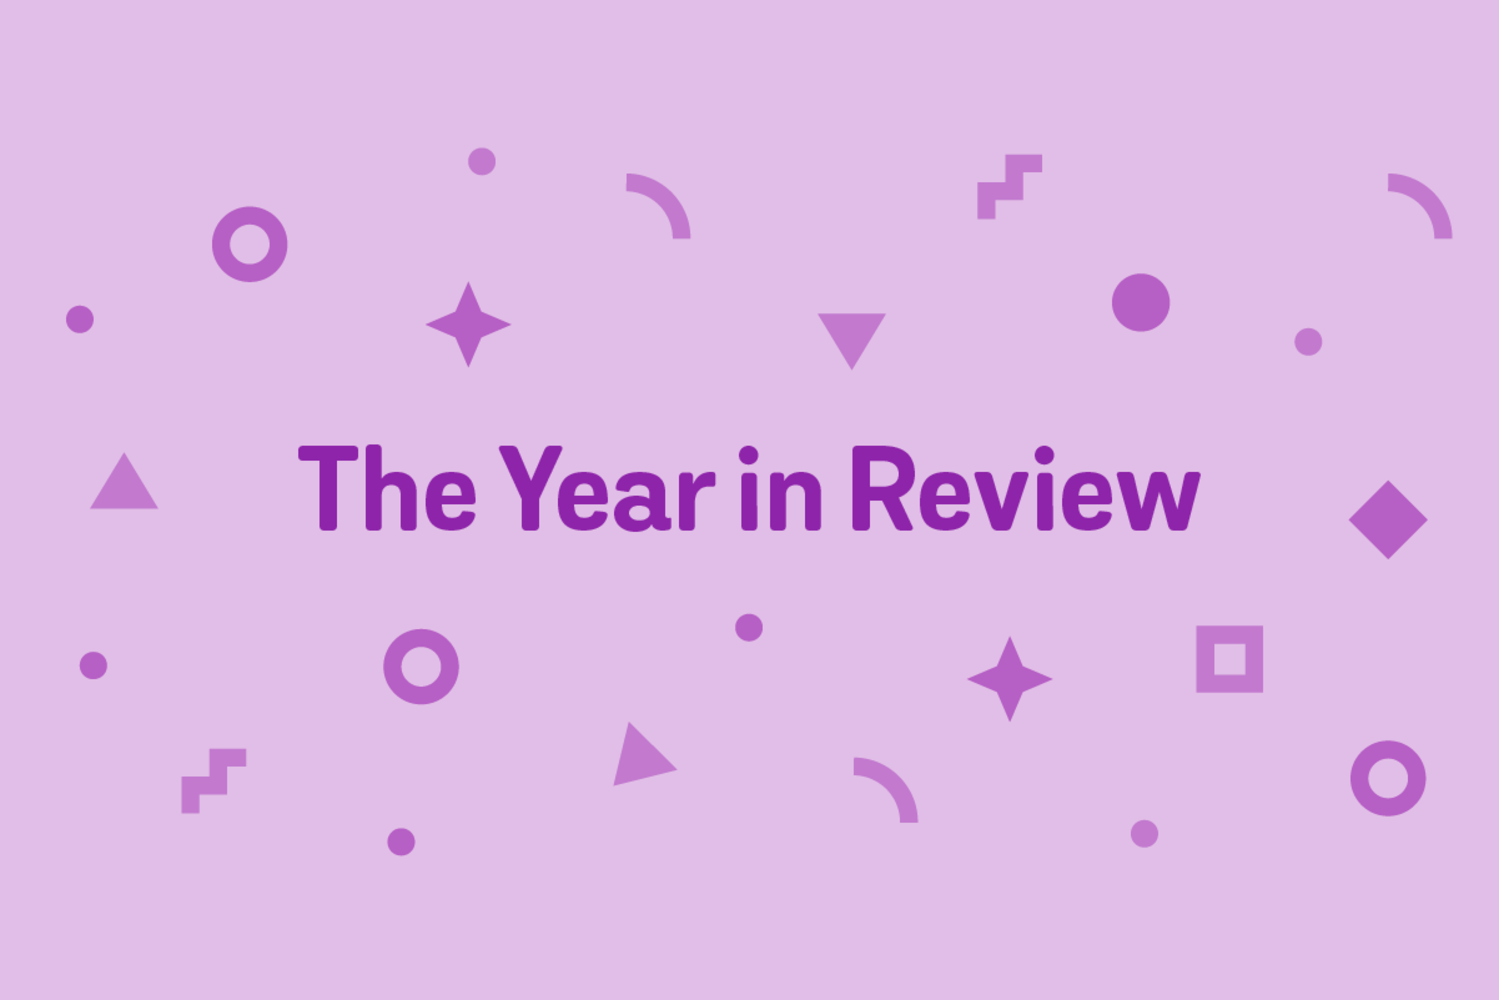 The Year in Review 2018